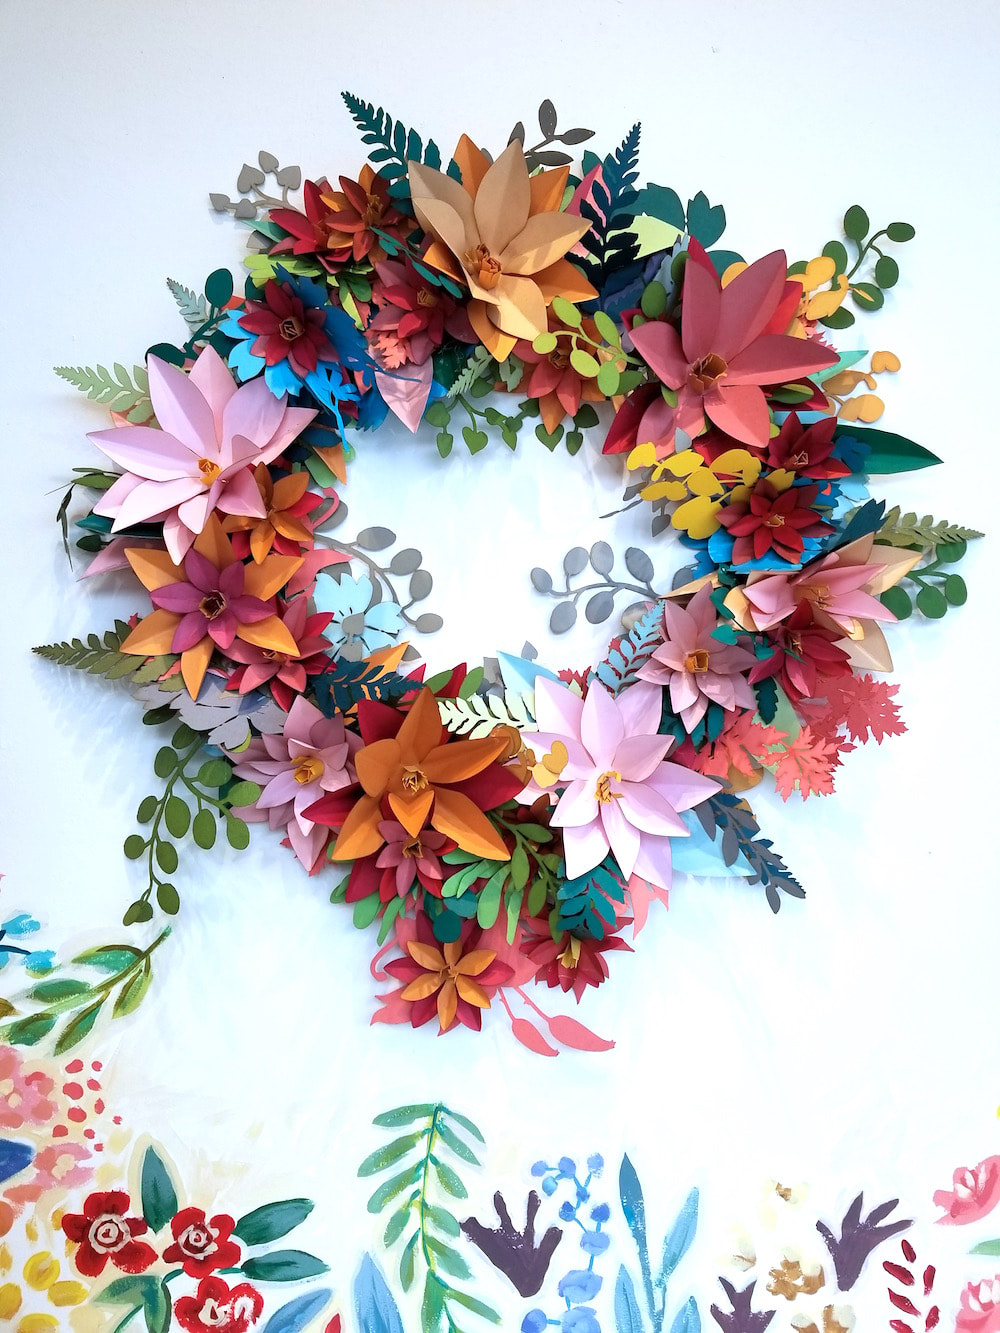 Laser cut paper florals using the Glowforge by Embellishments Studio